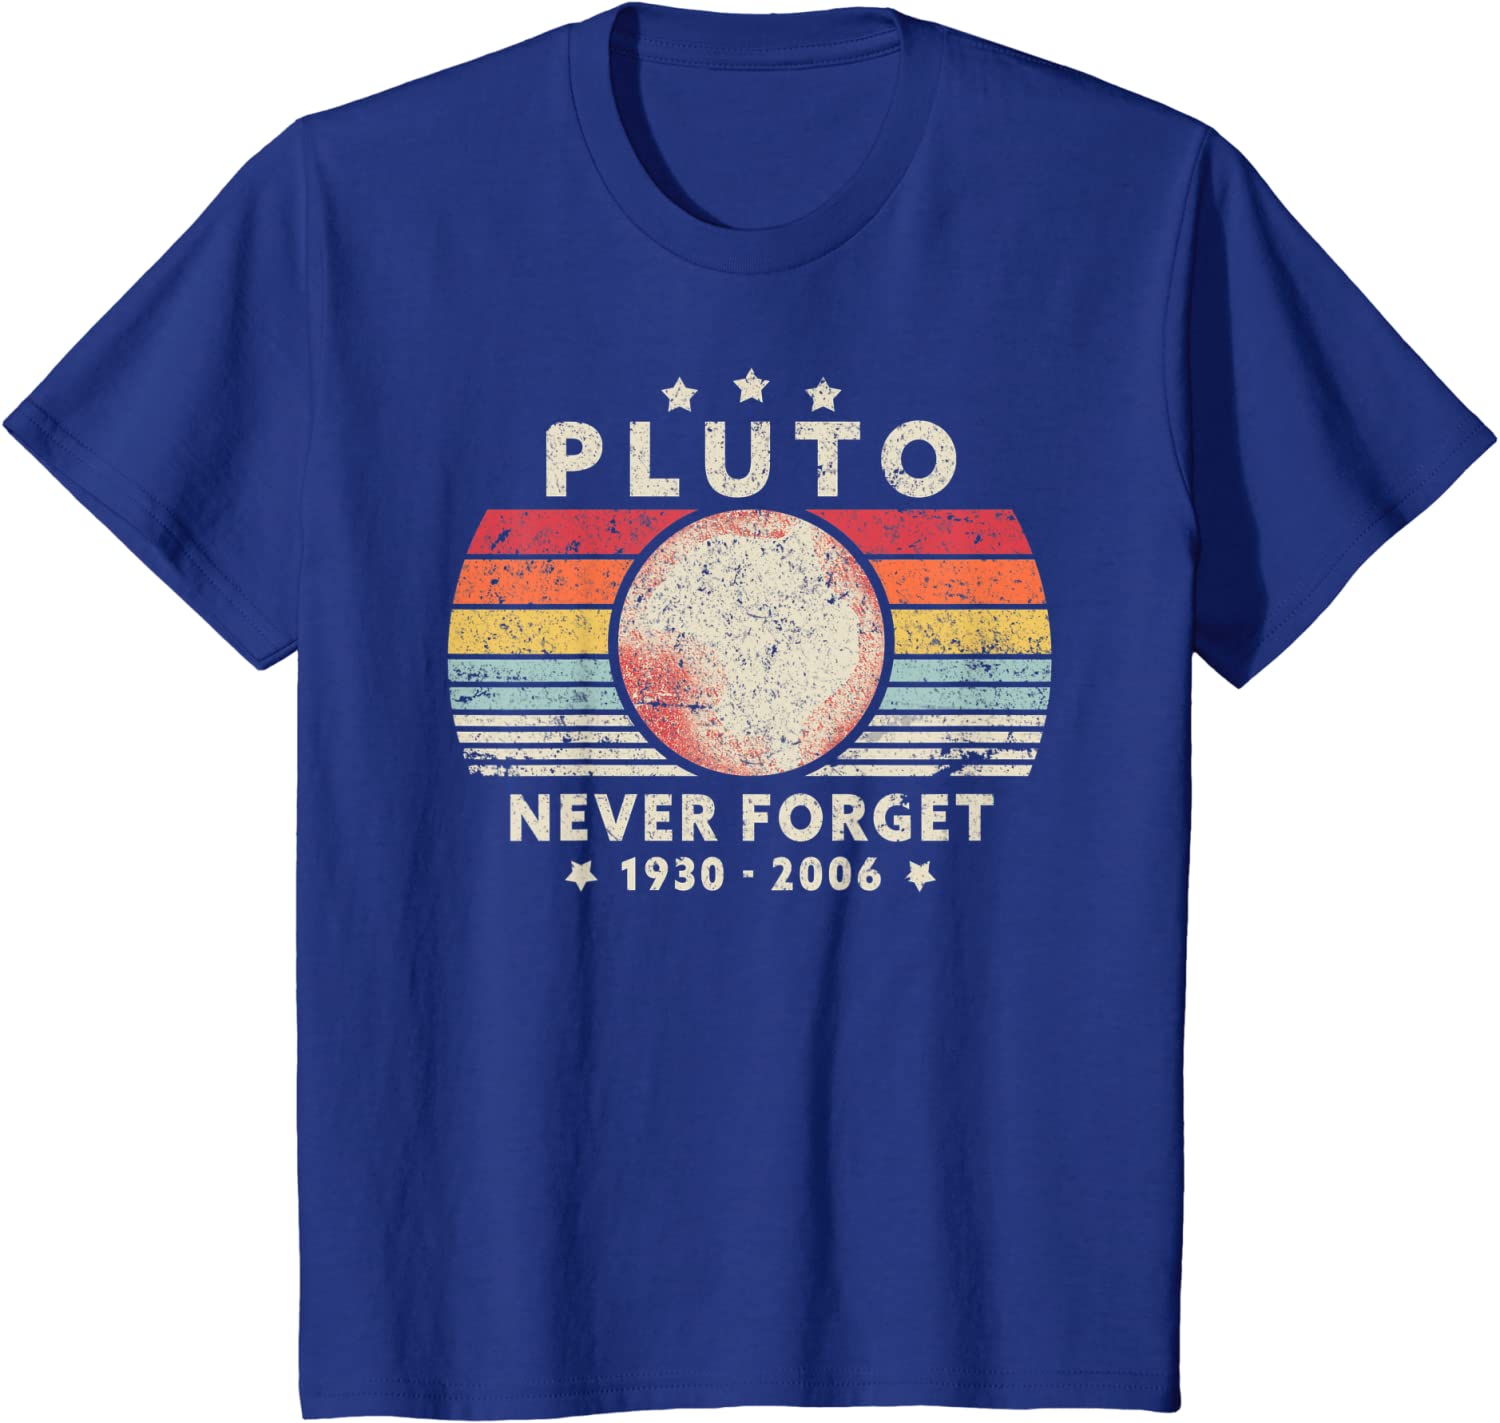 Navy Blue "Pluto.  Never Forget" T-Shirt